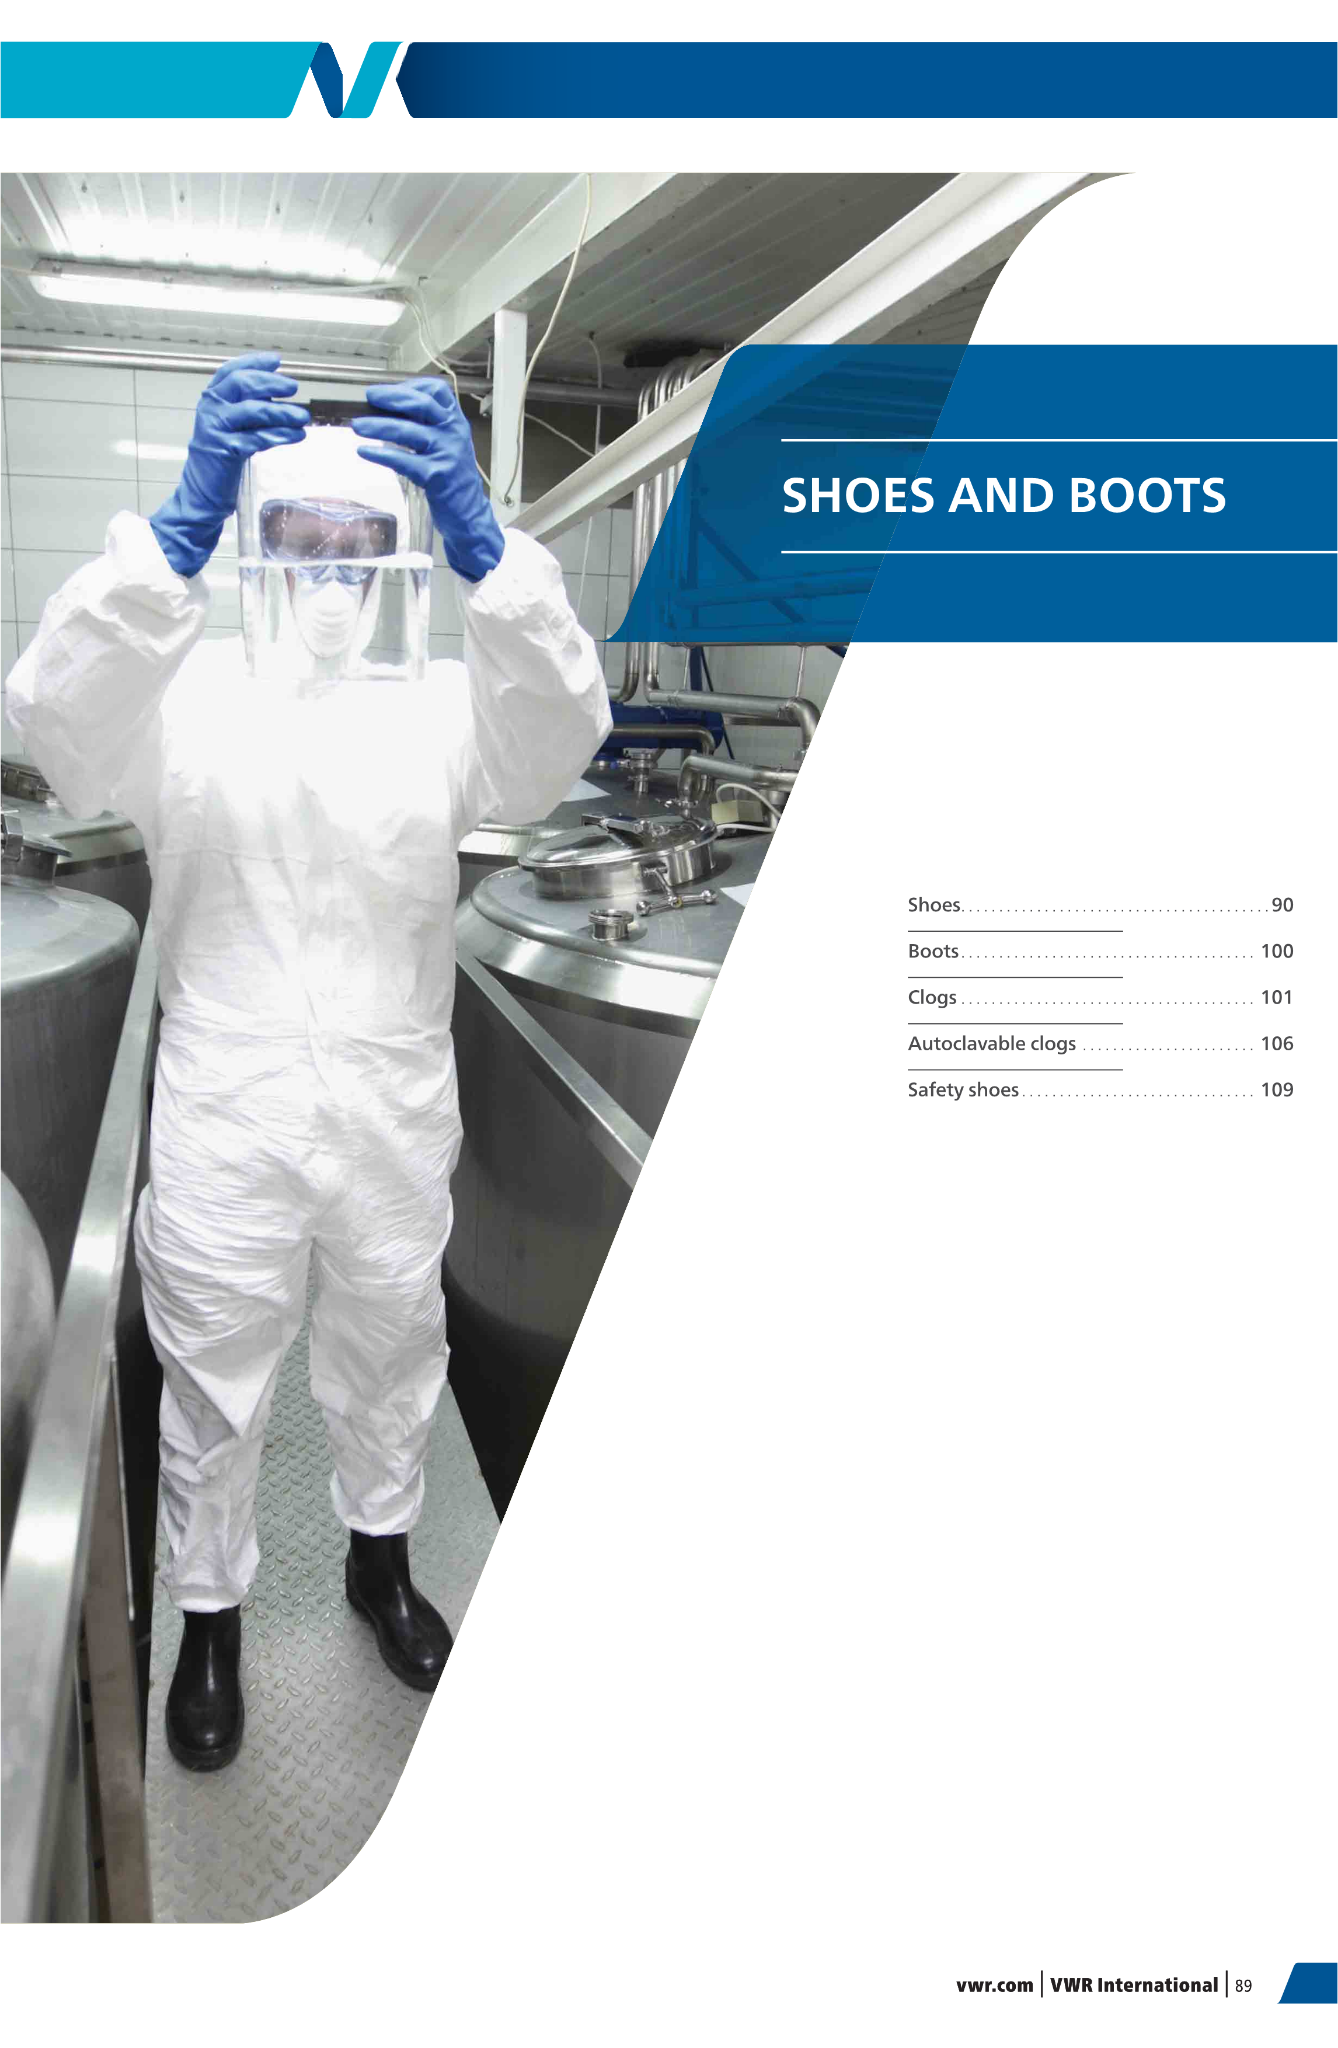 Footwear For Cleanrooms - Giầy Dép Phòng Sạch